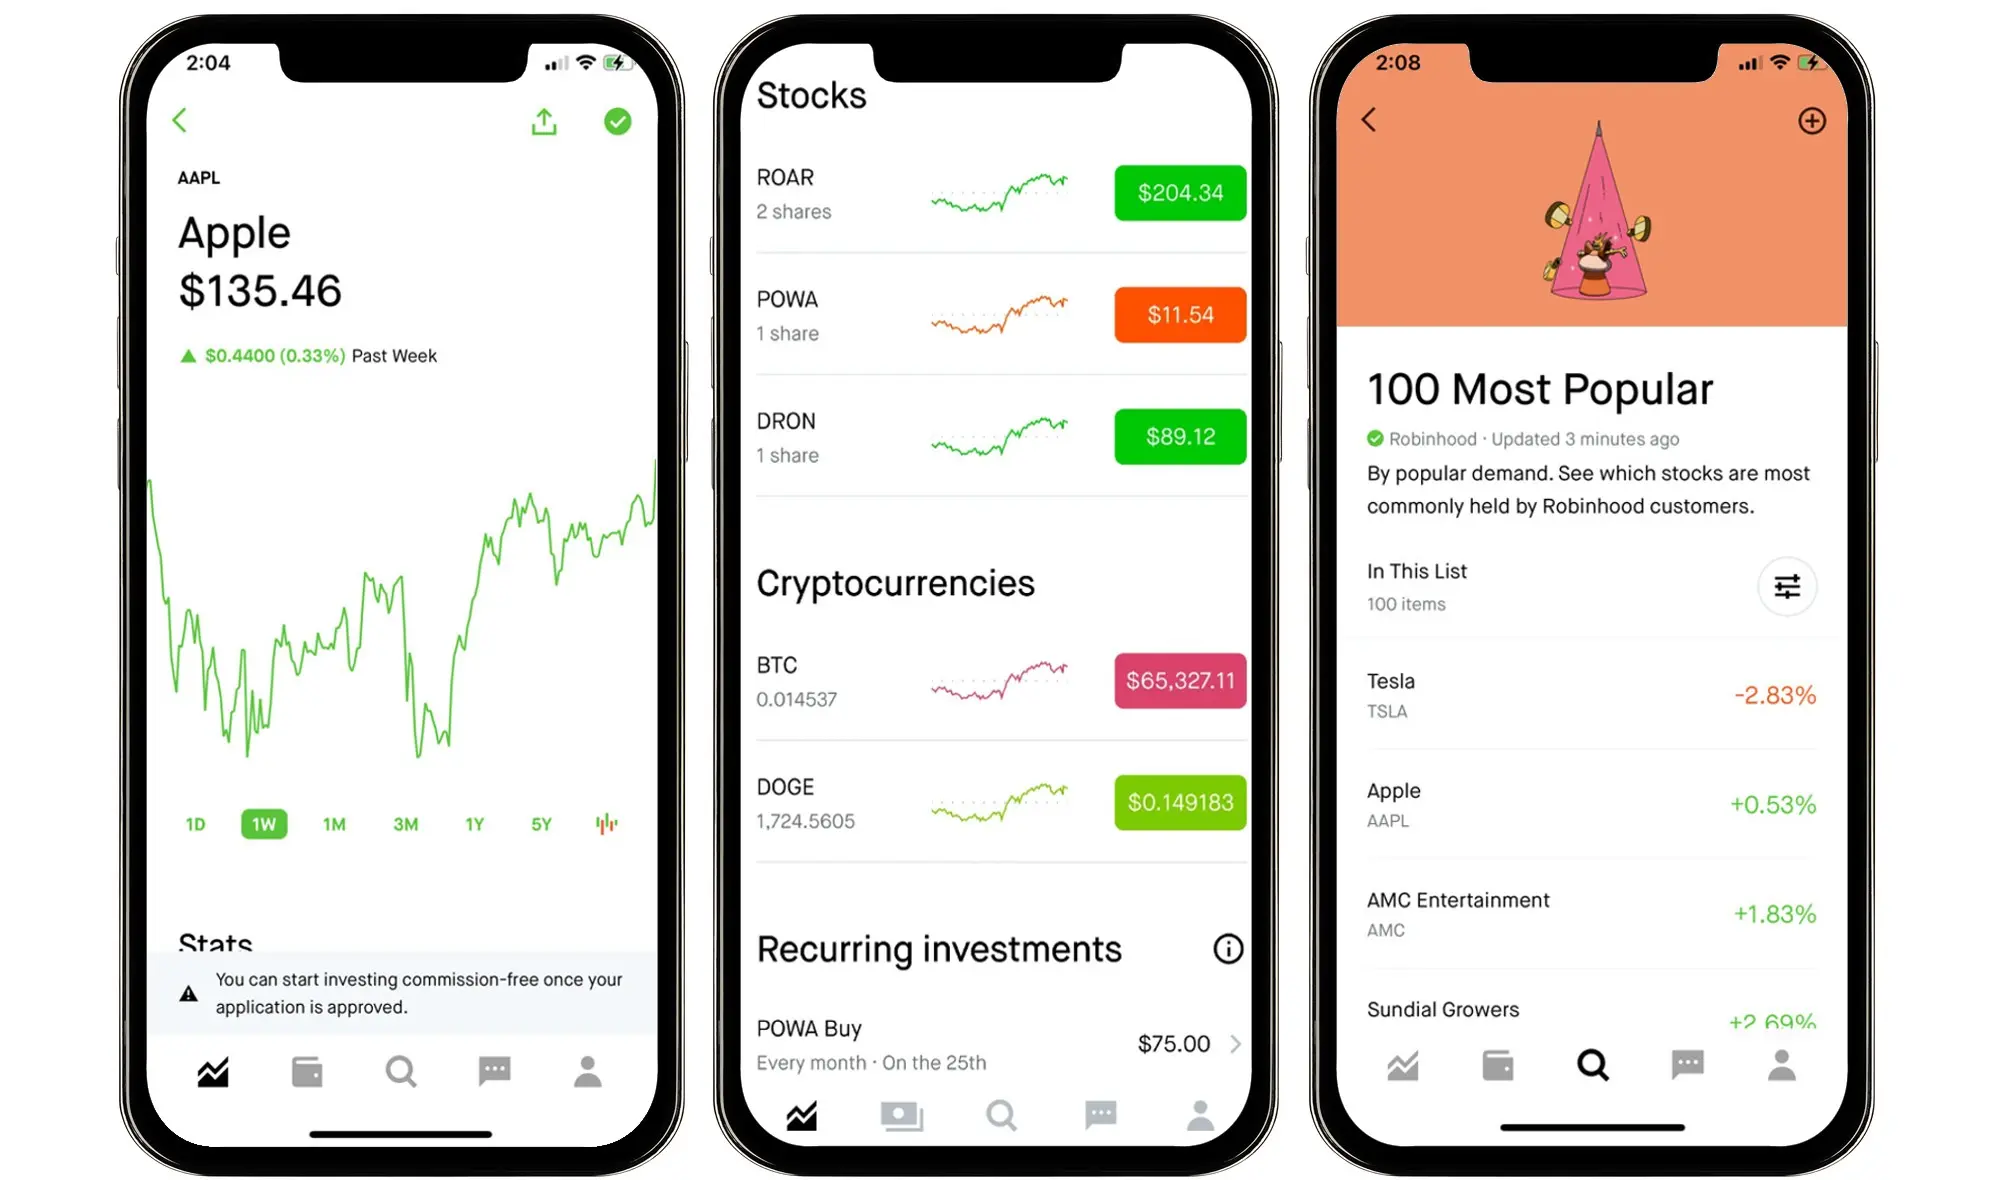 Robinhood Free Stock - How To Get Up To $1,700 In Free Shares